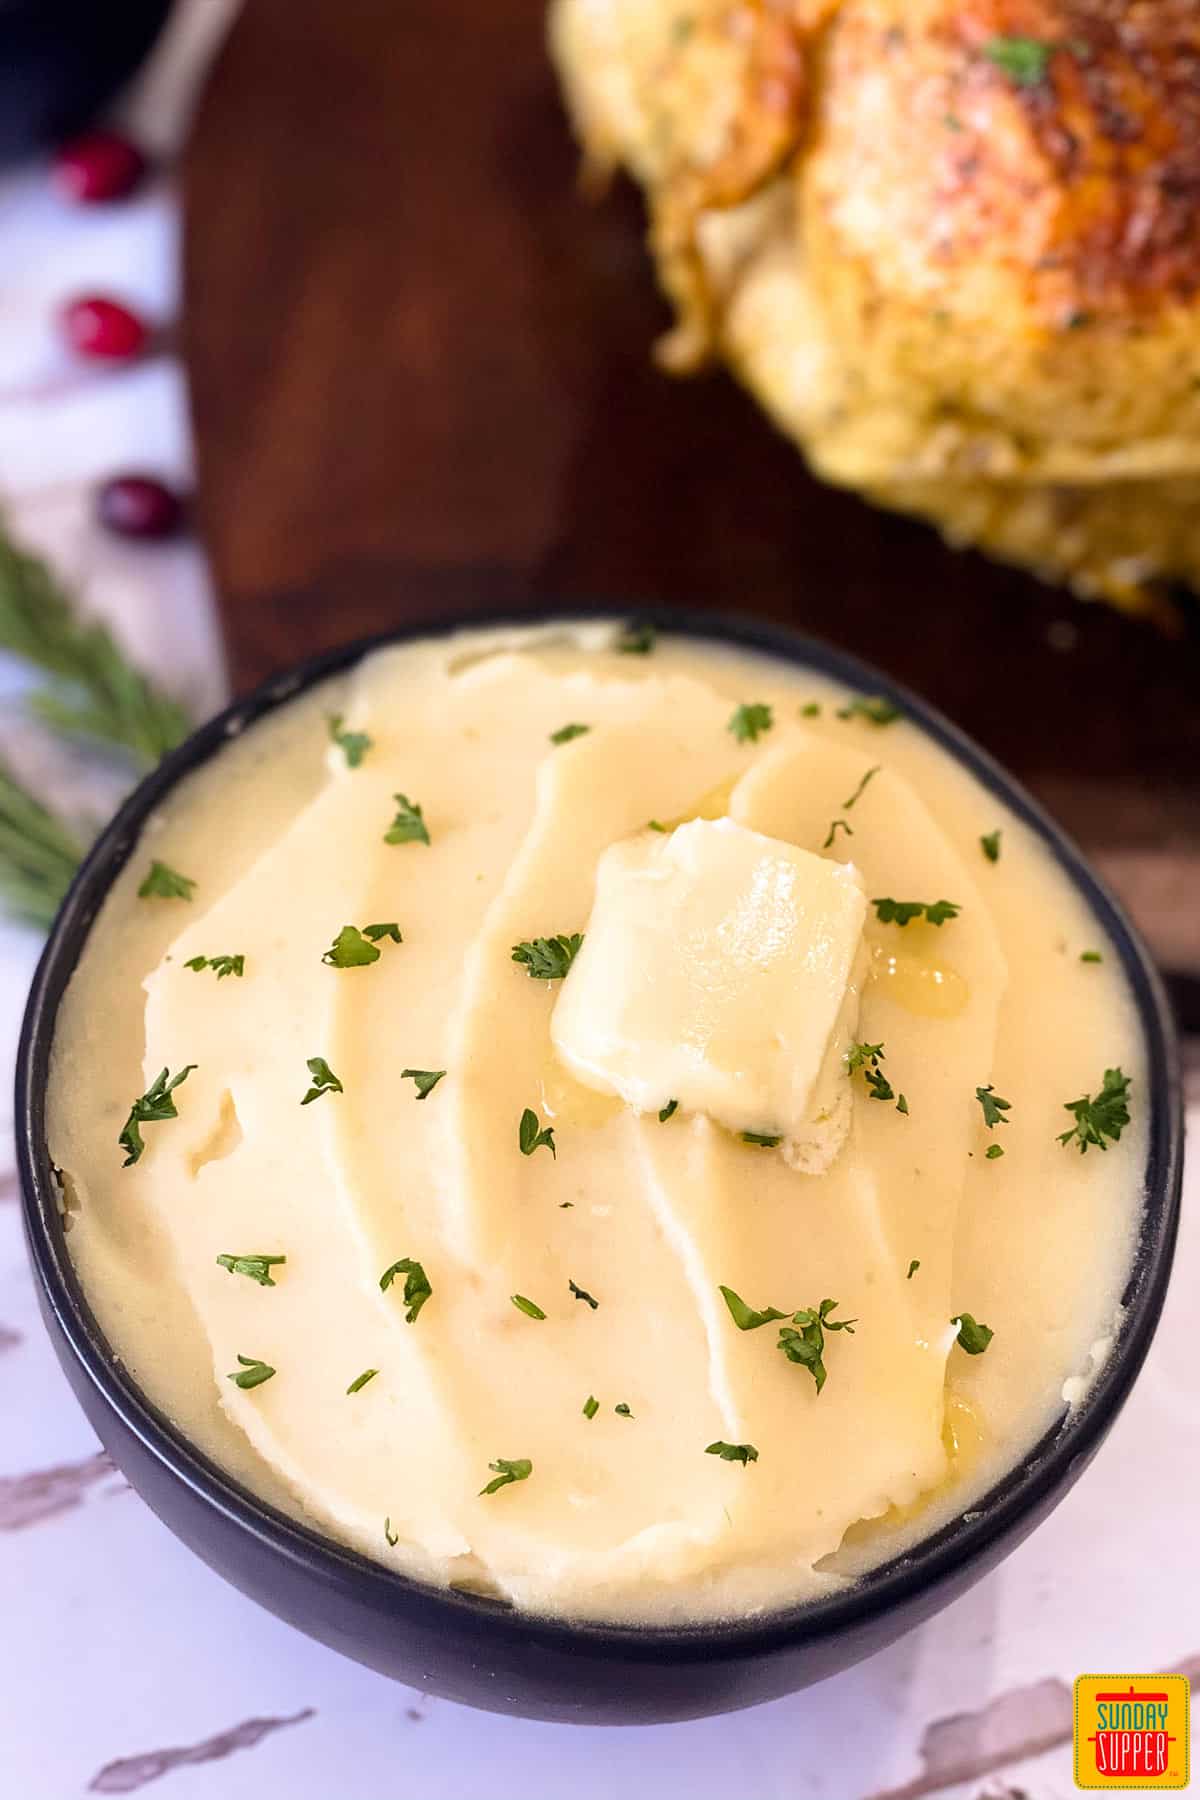 A bowl of mashed potatoes with a pat of butter on top next to turkey on a cutting board